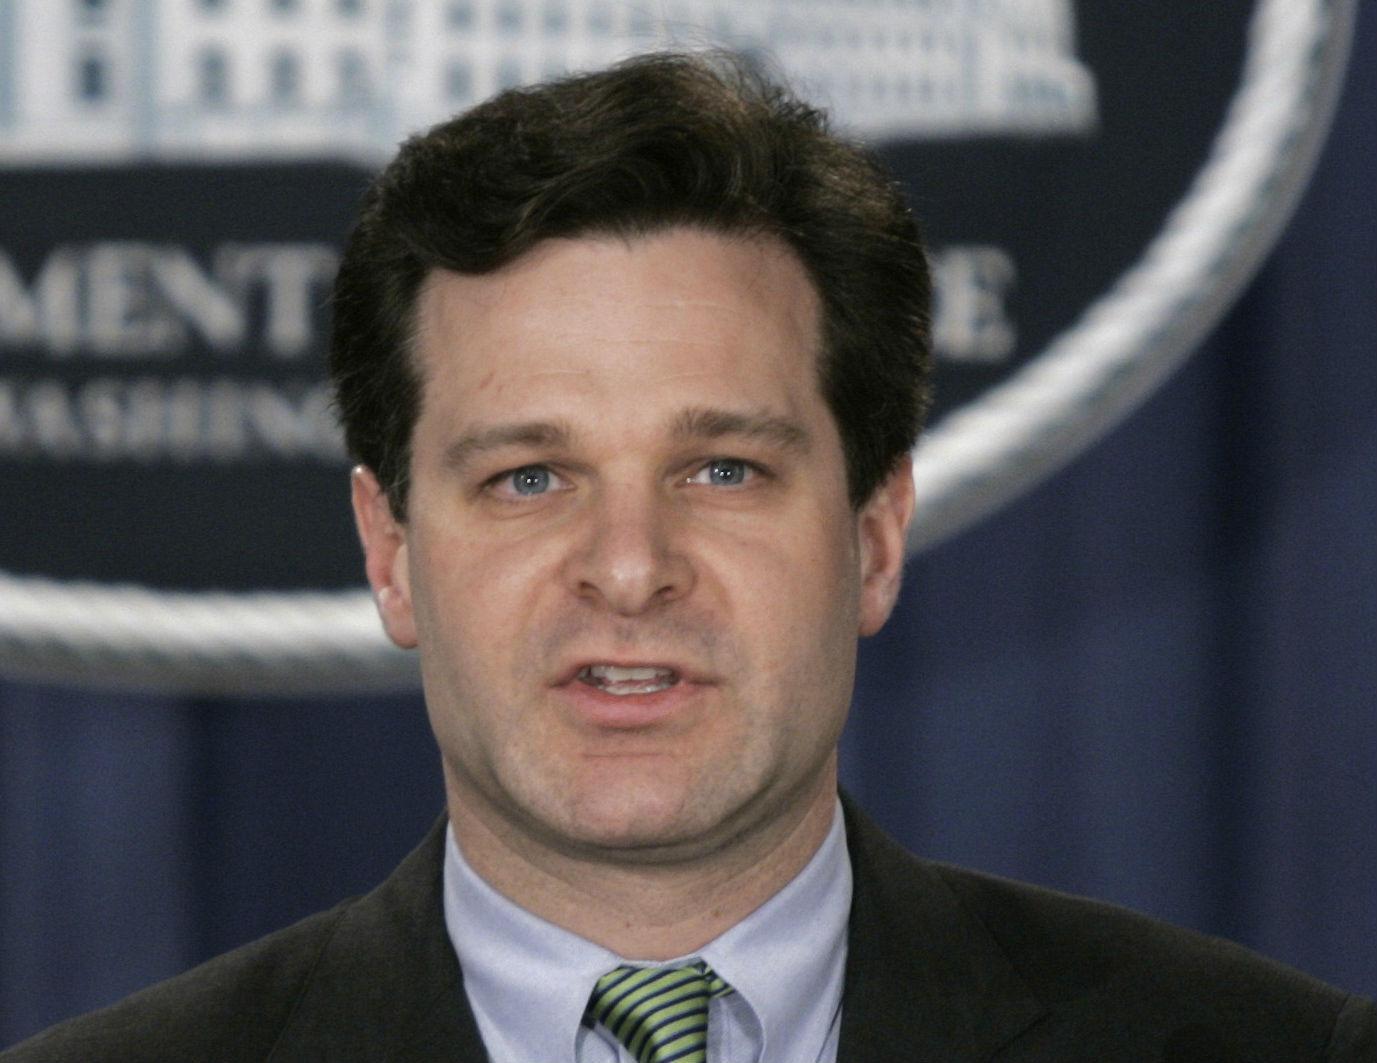 Mr Wray, pictured in 2005, has been a partner at the King & Spalding law firm since he left the Justice Department that same year